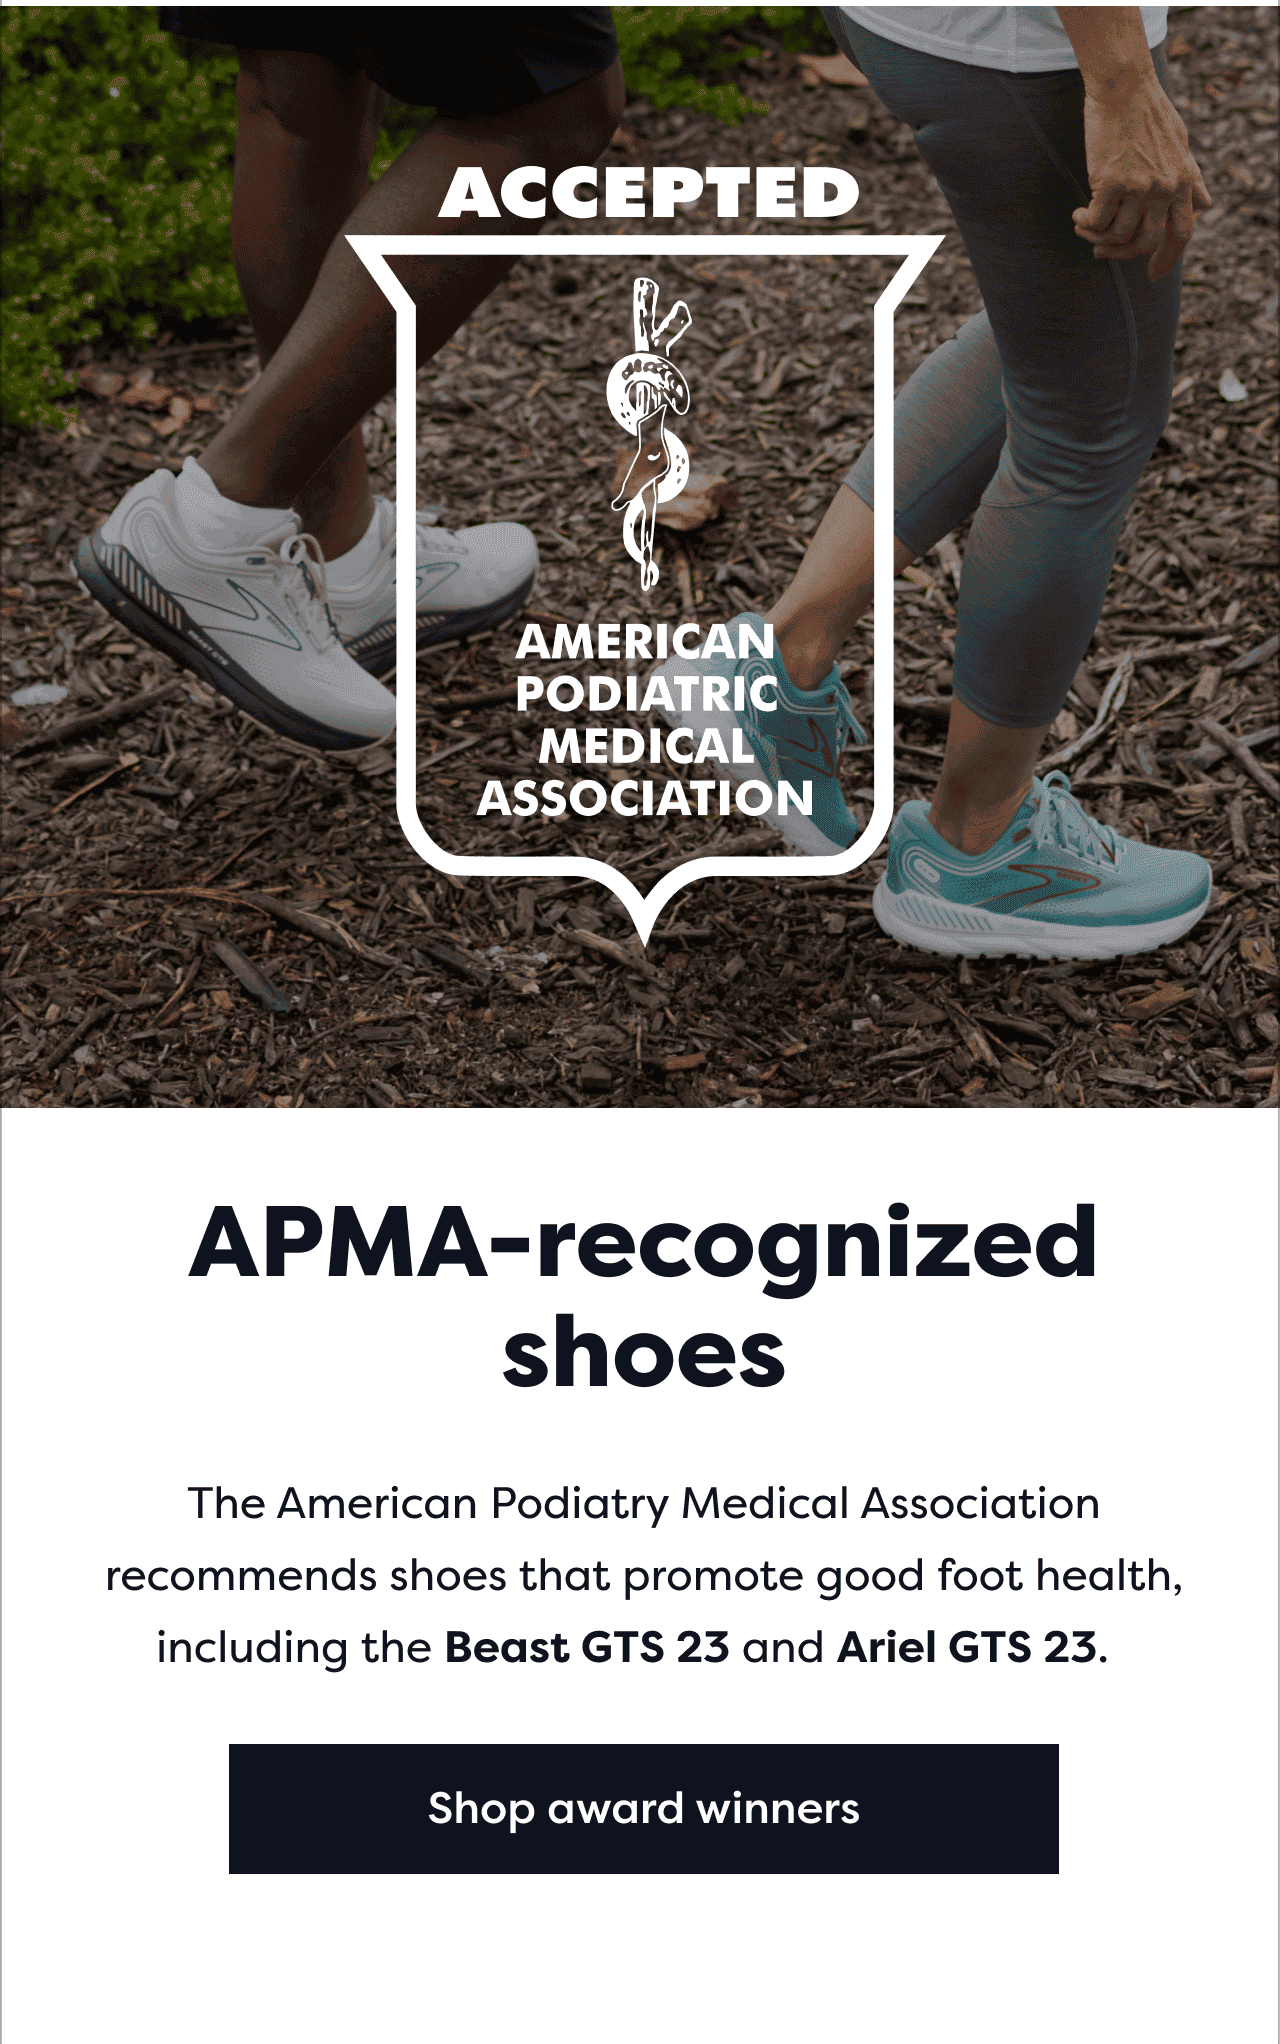 Accepted American Podiatric Medical Association | APMA-recognized shoes | The American Podiatry Medical Association recommends shoes that promote good foot health, including the Beast GTS 23 and Ariel GTS 23. Shop award winners